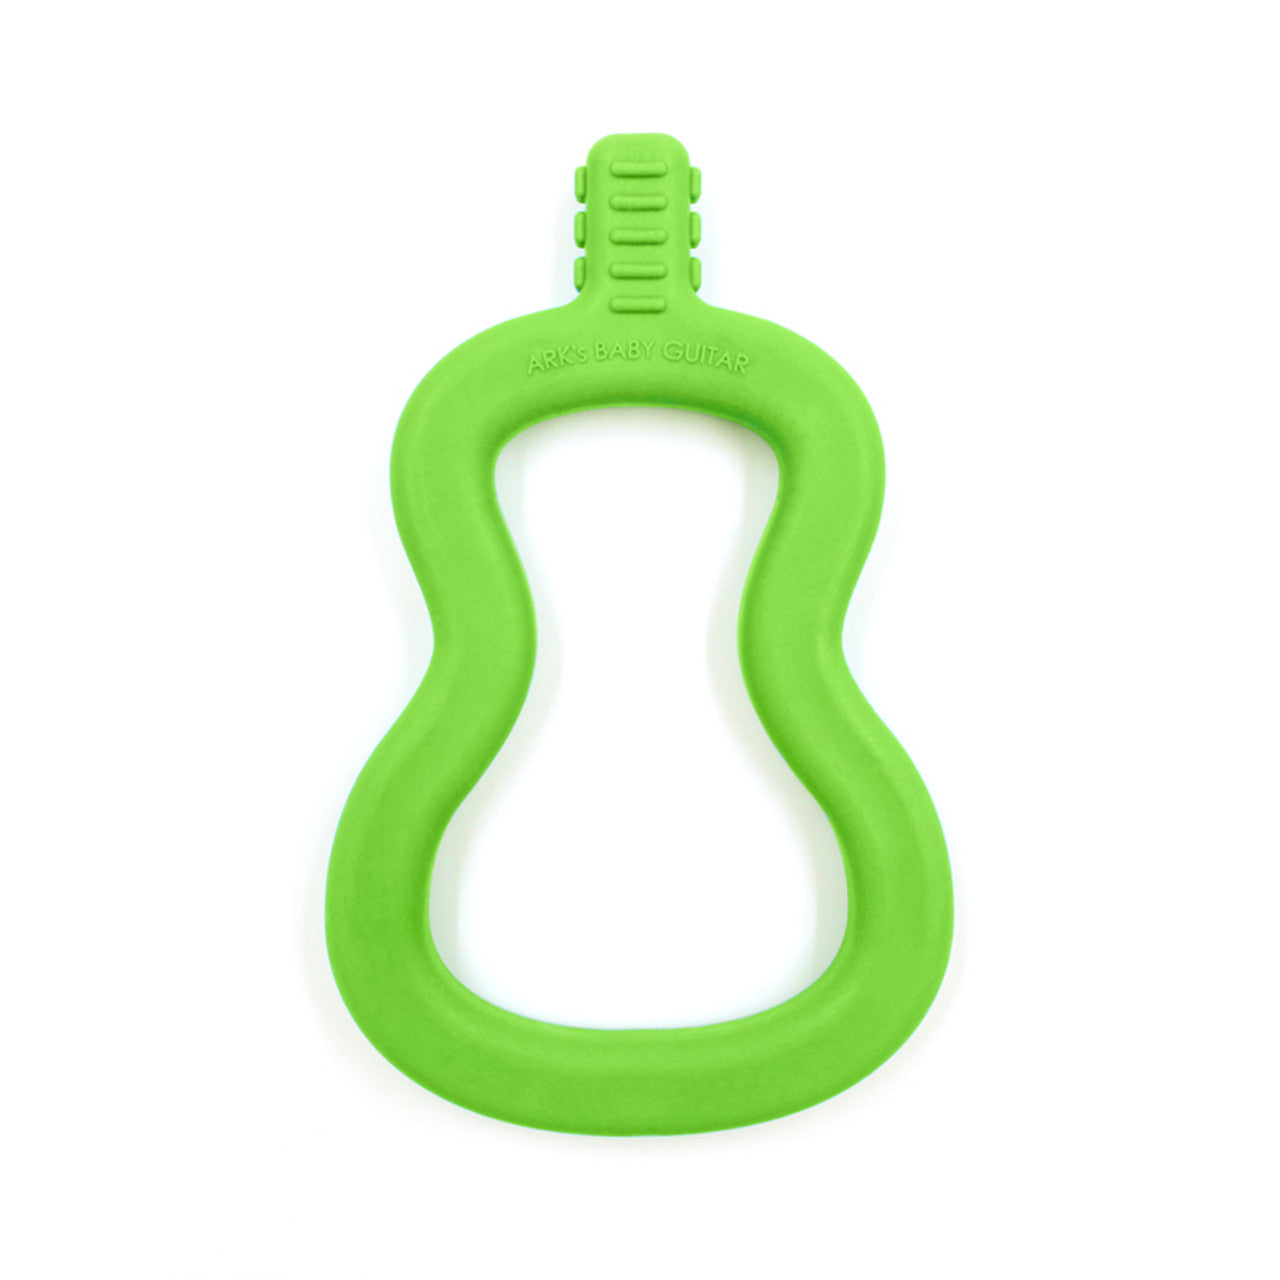 The lime green Baby Guitar Chew.